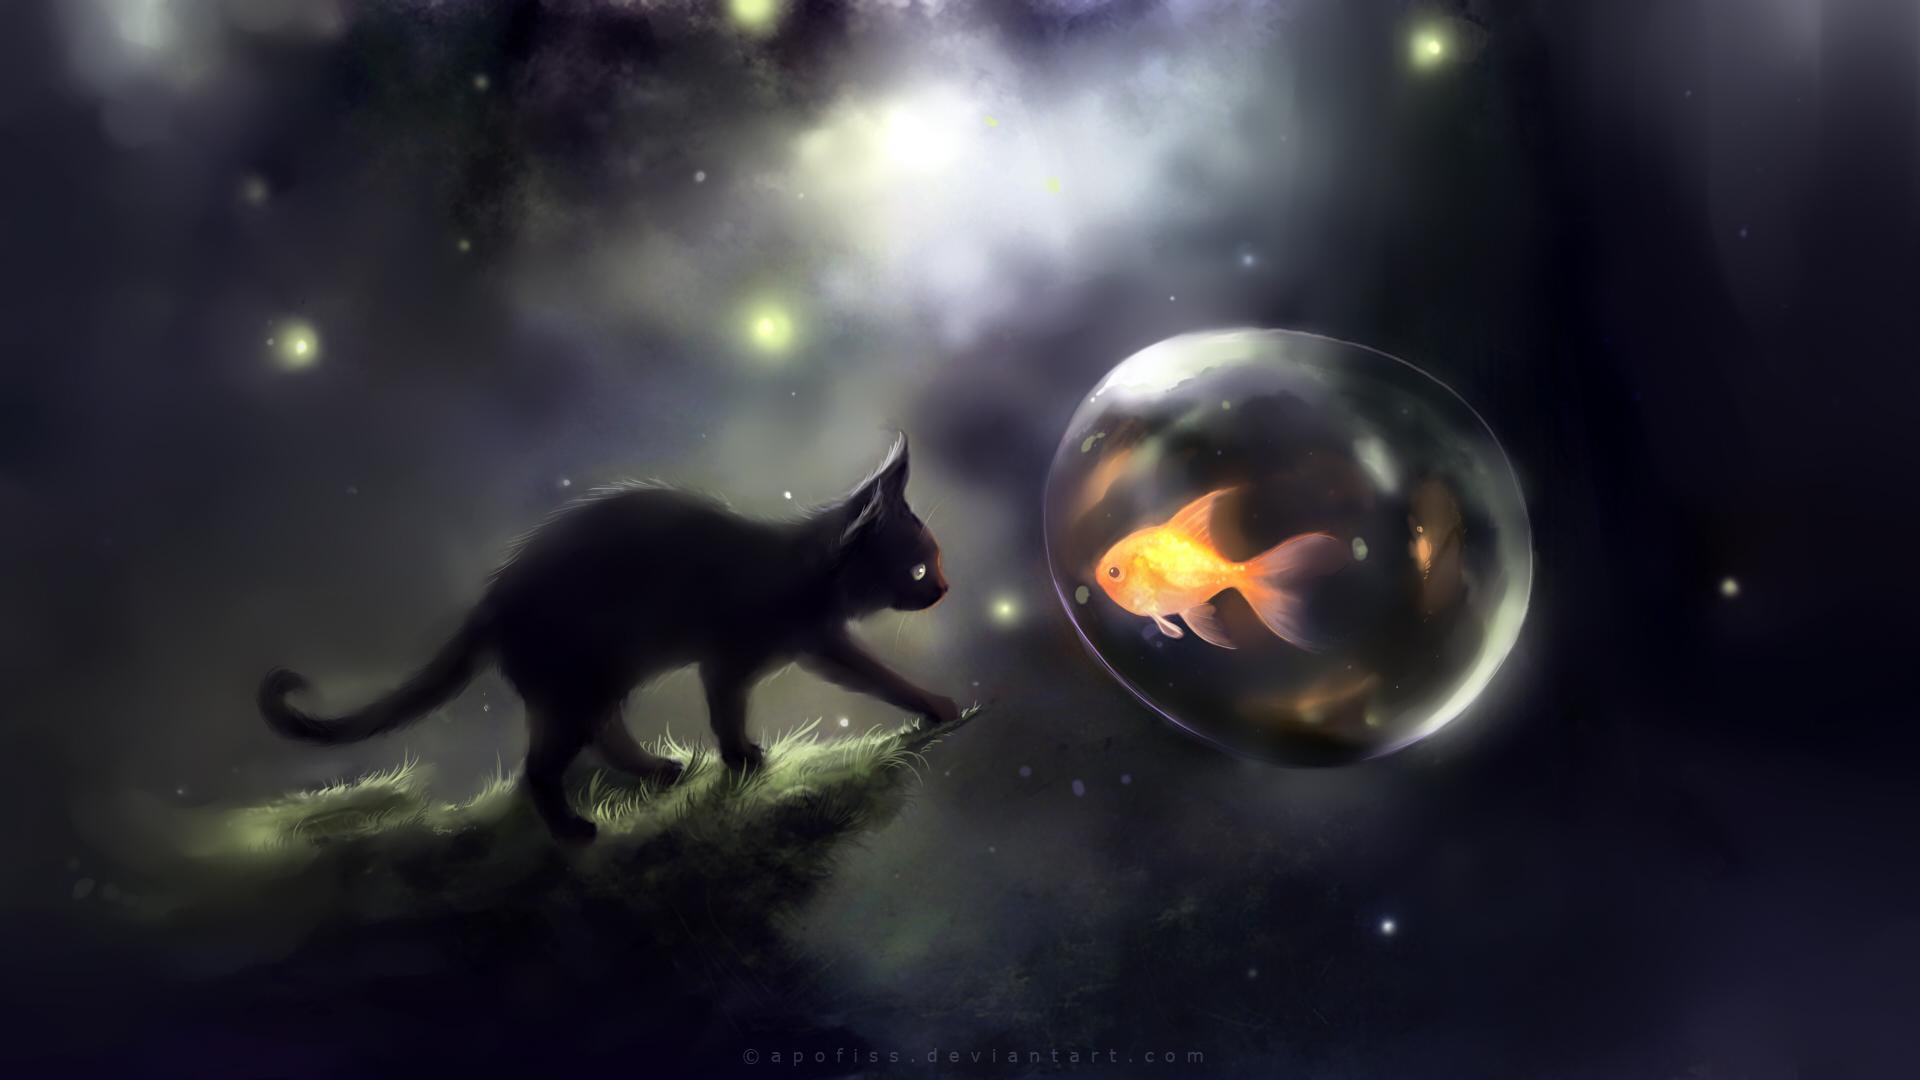 A Fantasy World, space, black cat, galaxy, kitten, fish, 3d and abstract